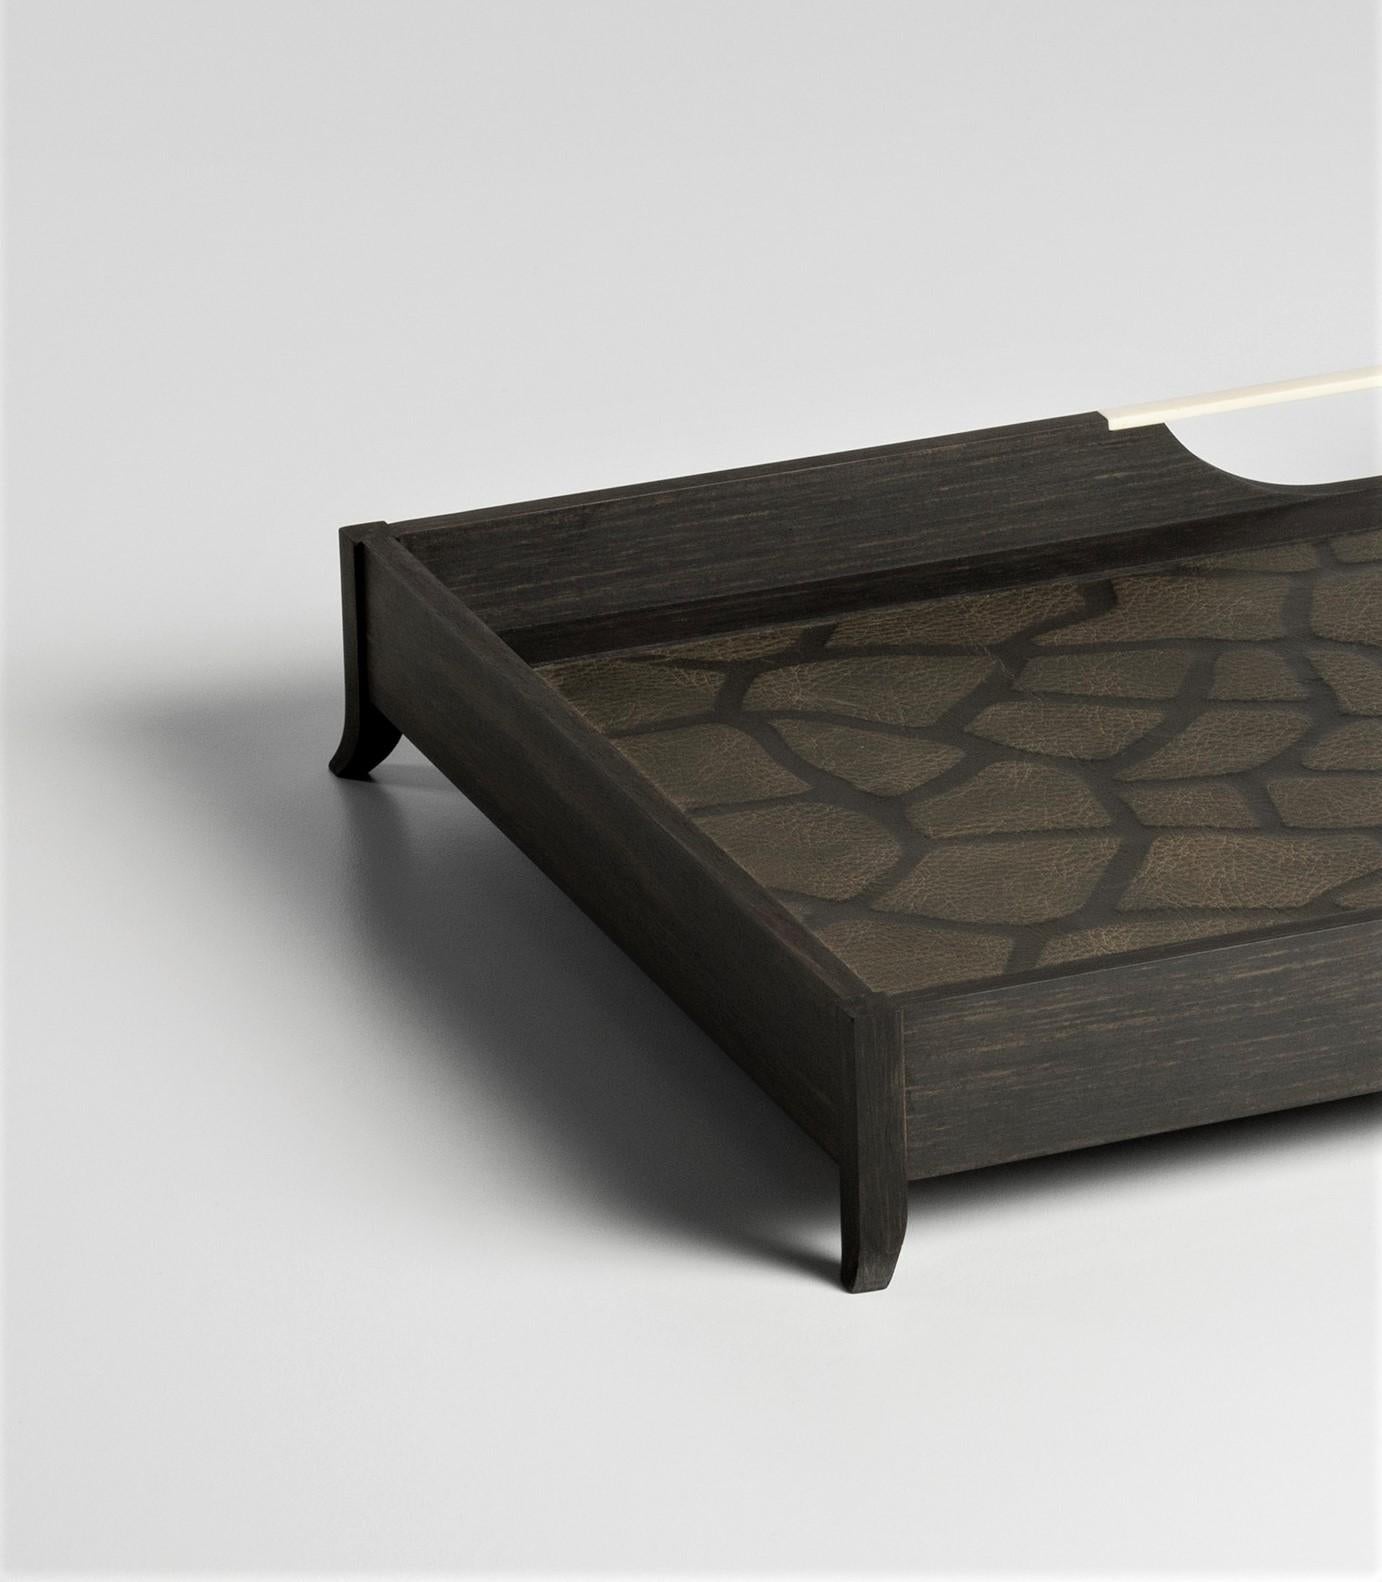 Modern Malindi Ebony, Bone and Leather Tray in Contemporary Style by Giordano Vigano For Sale